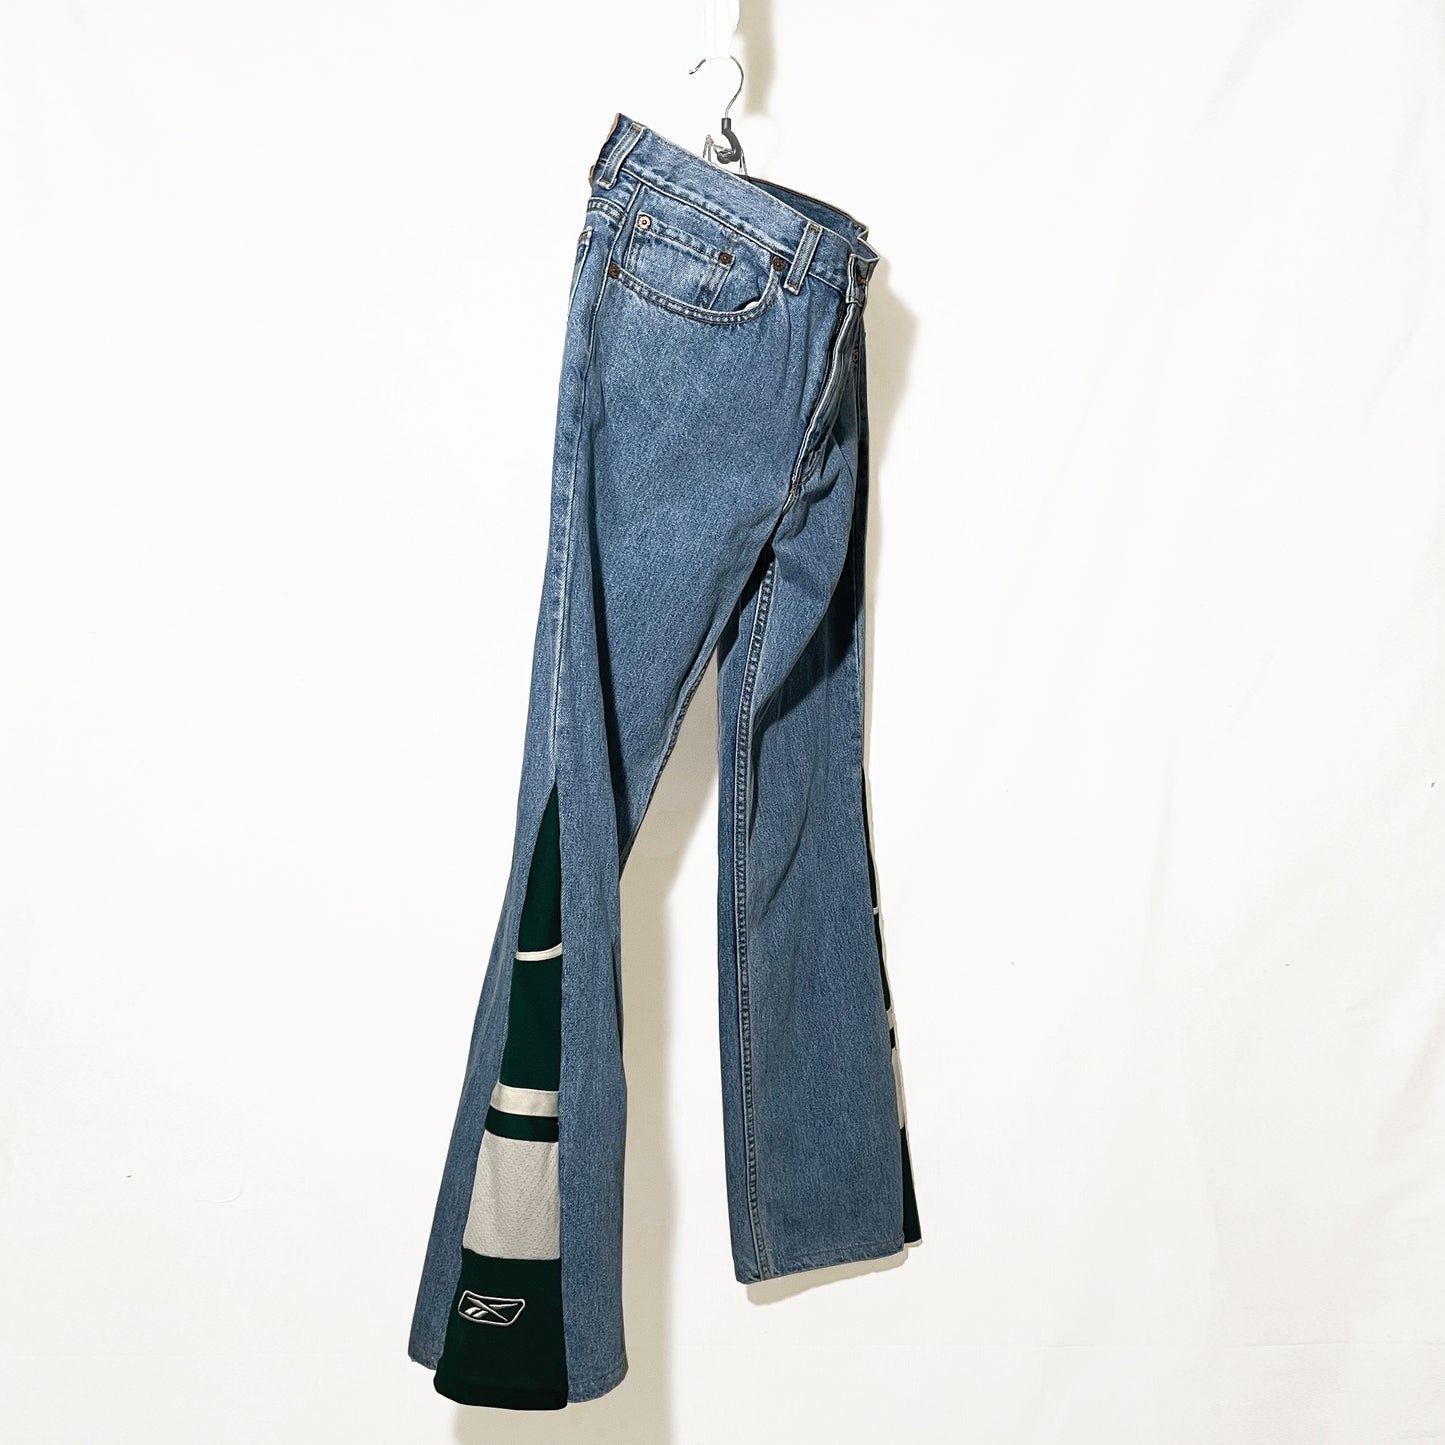 REWORKED FLARE JEANS